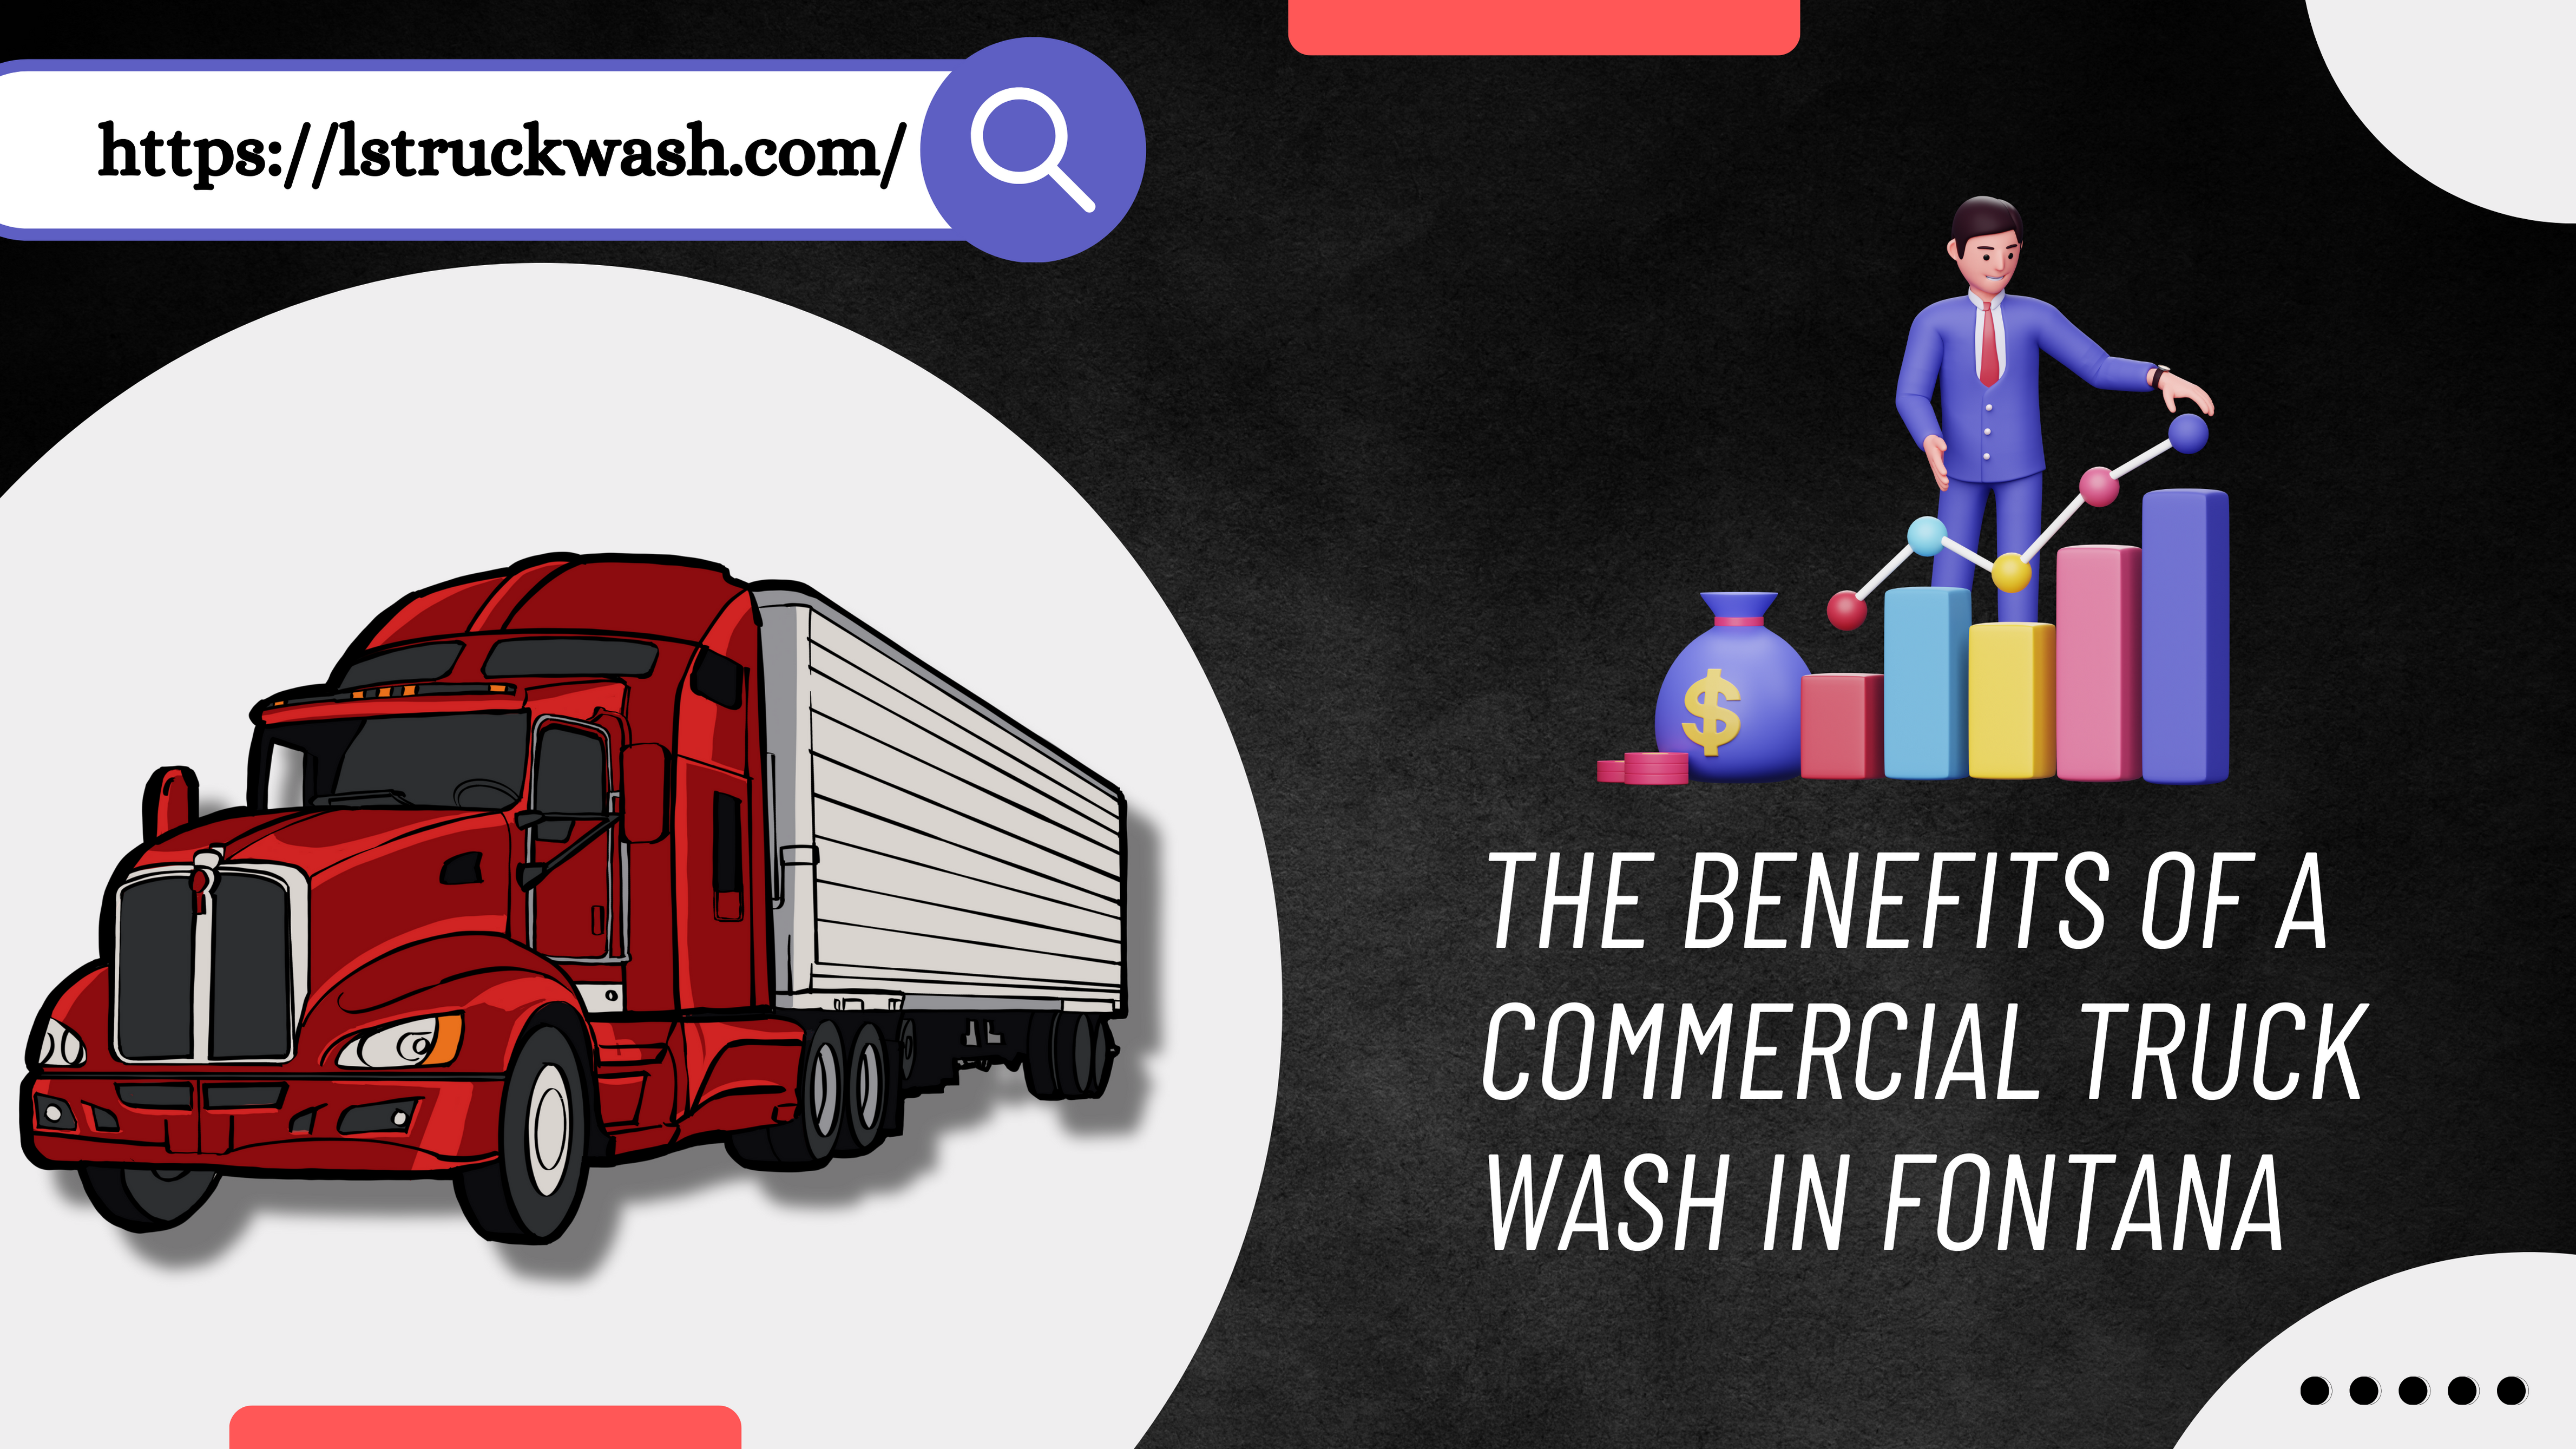 The Benefits of a Commercial Truck Wash in Fontana